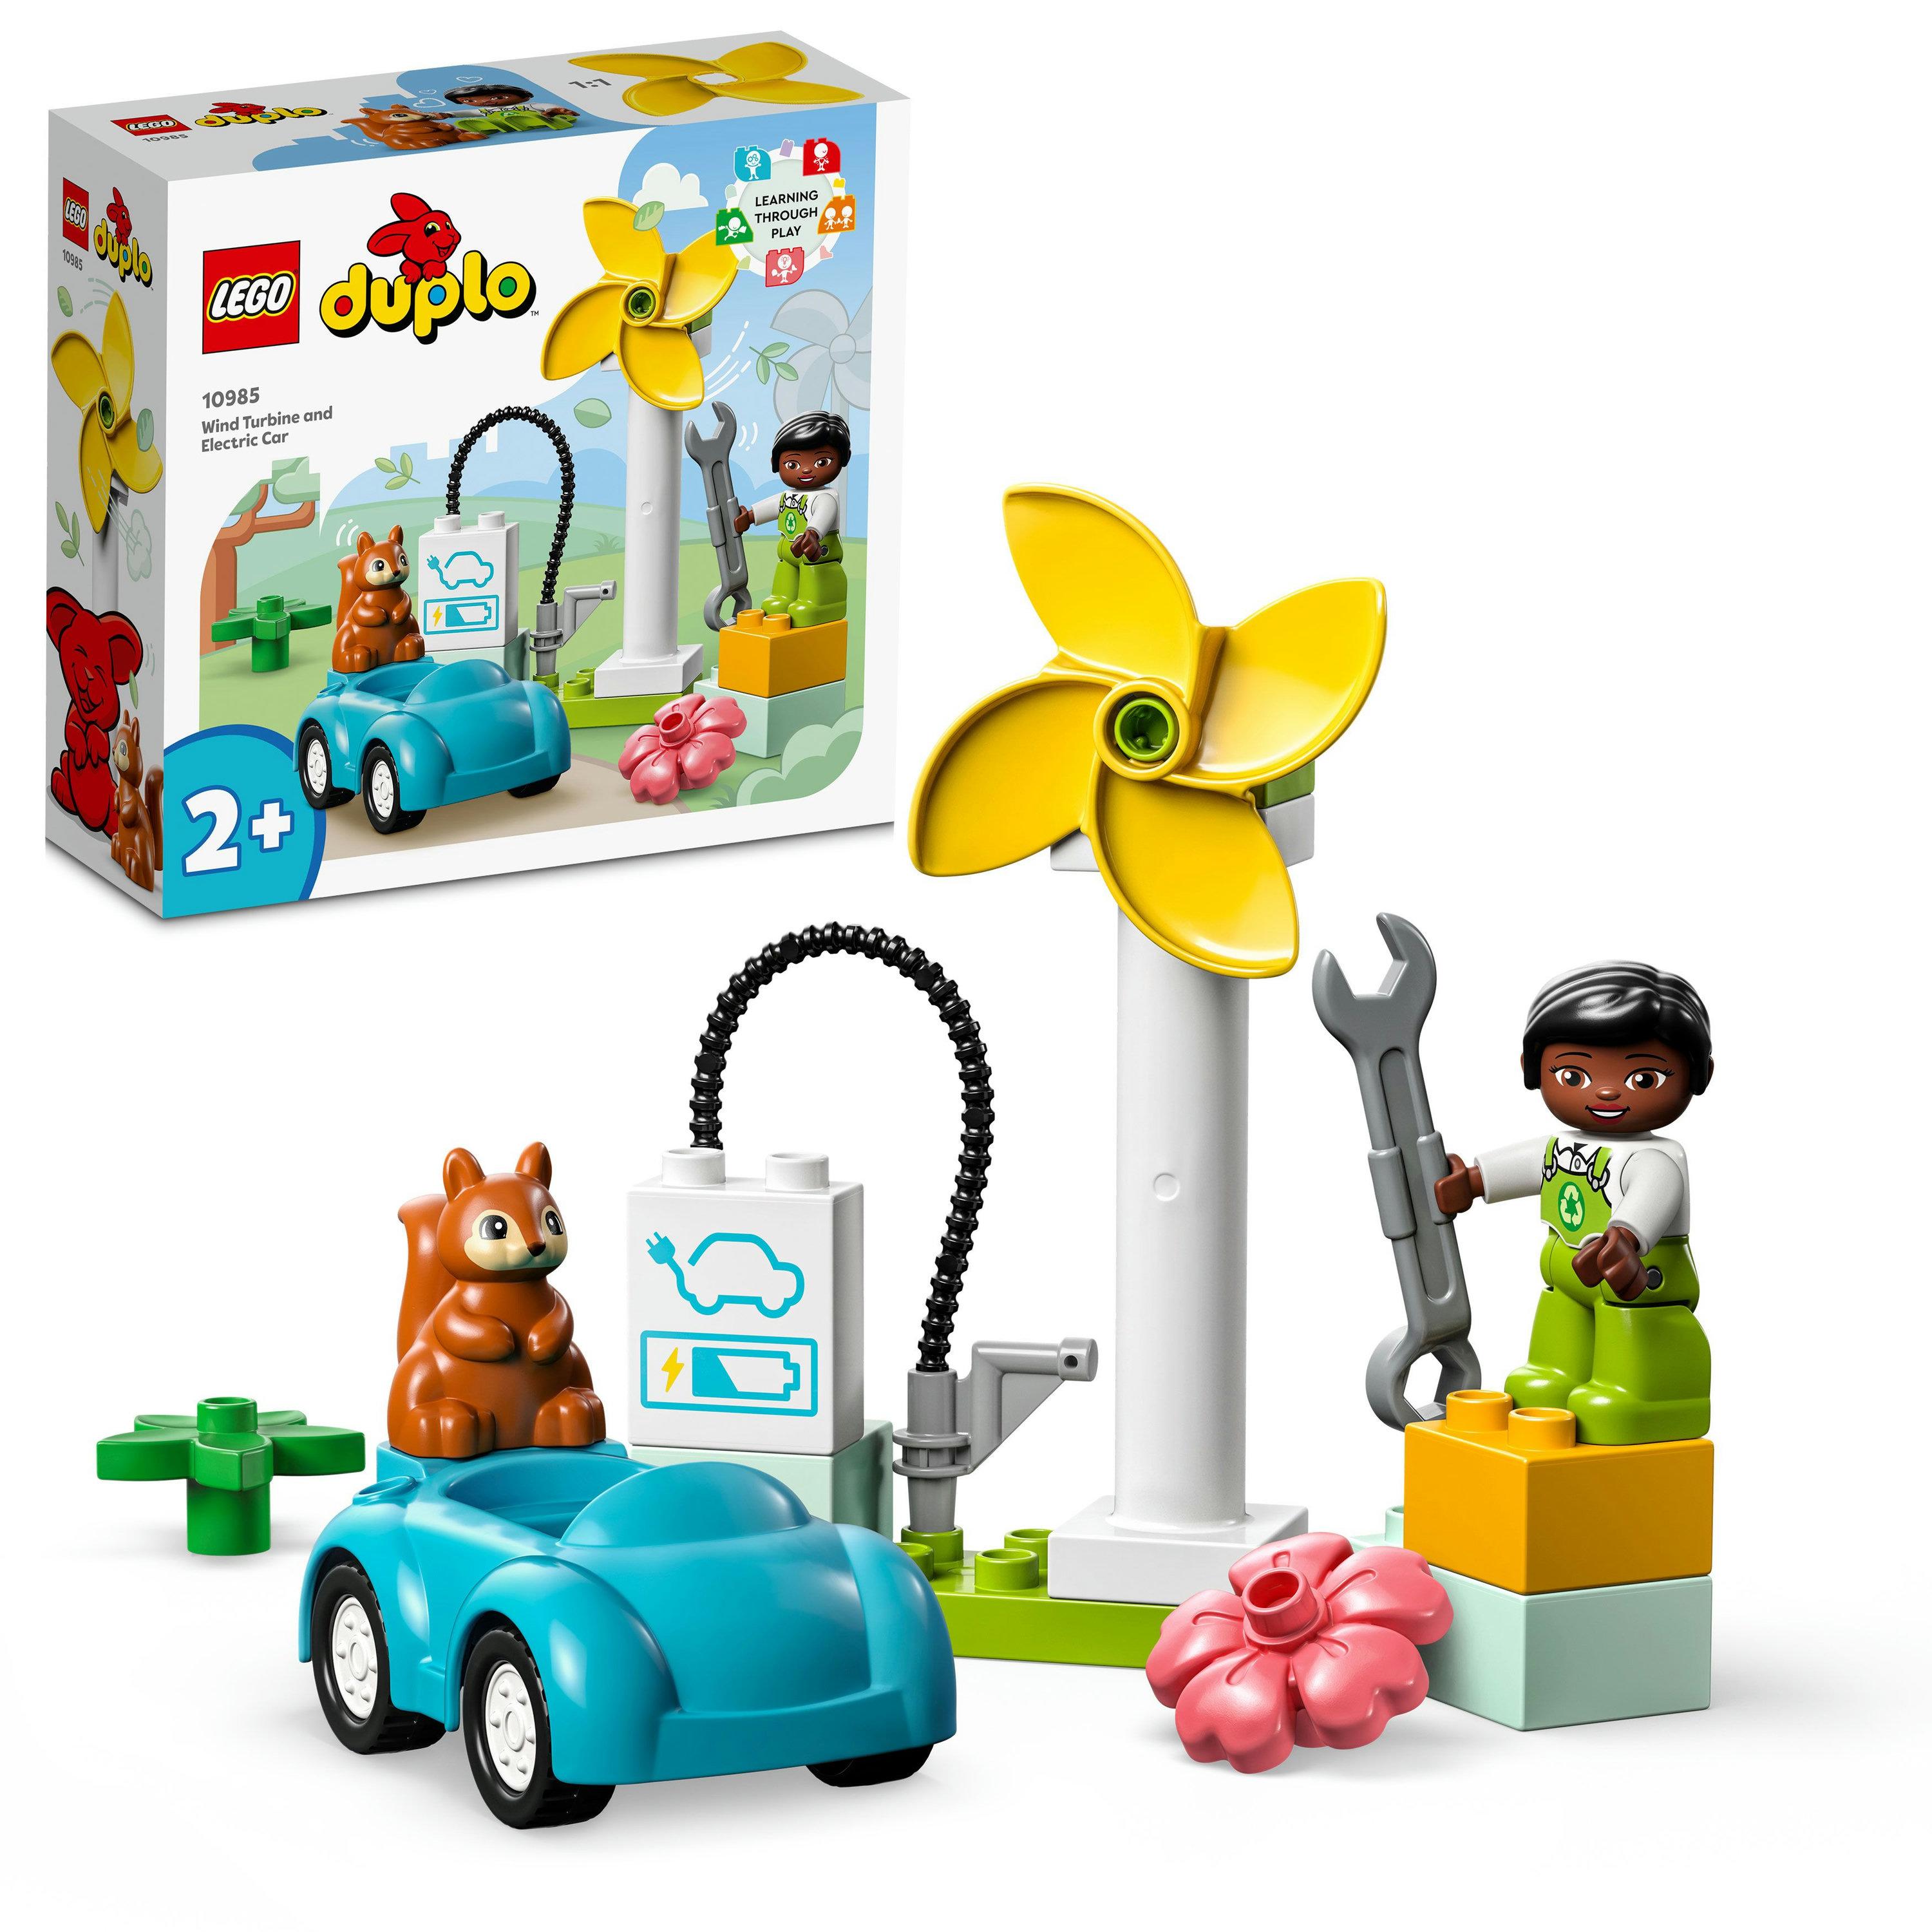 LEGO® DUPLO® Town Wind Turbine and Electric Car | 10985